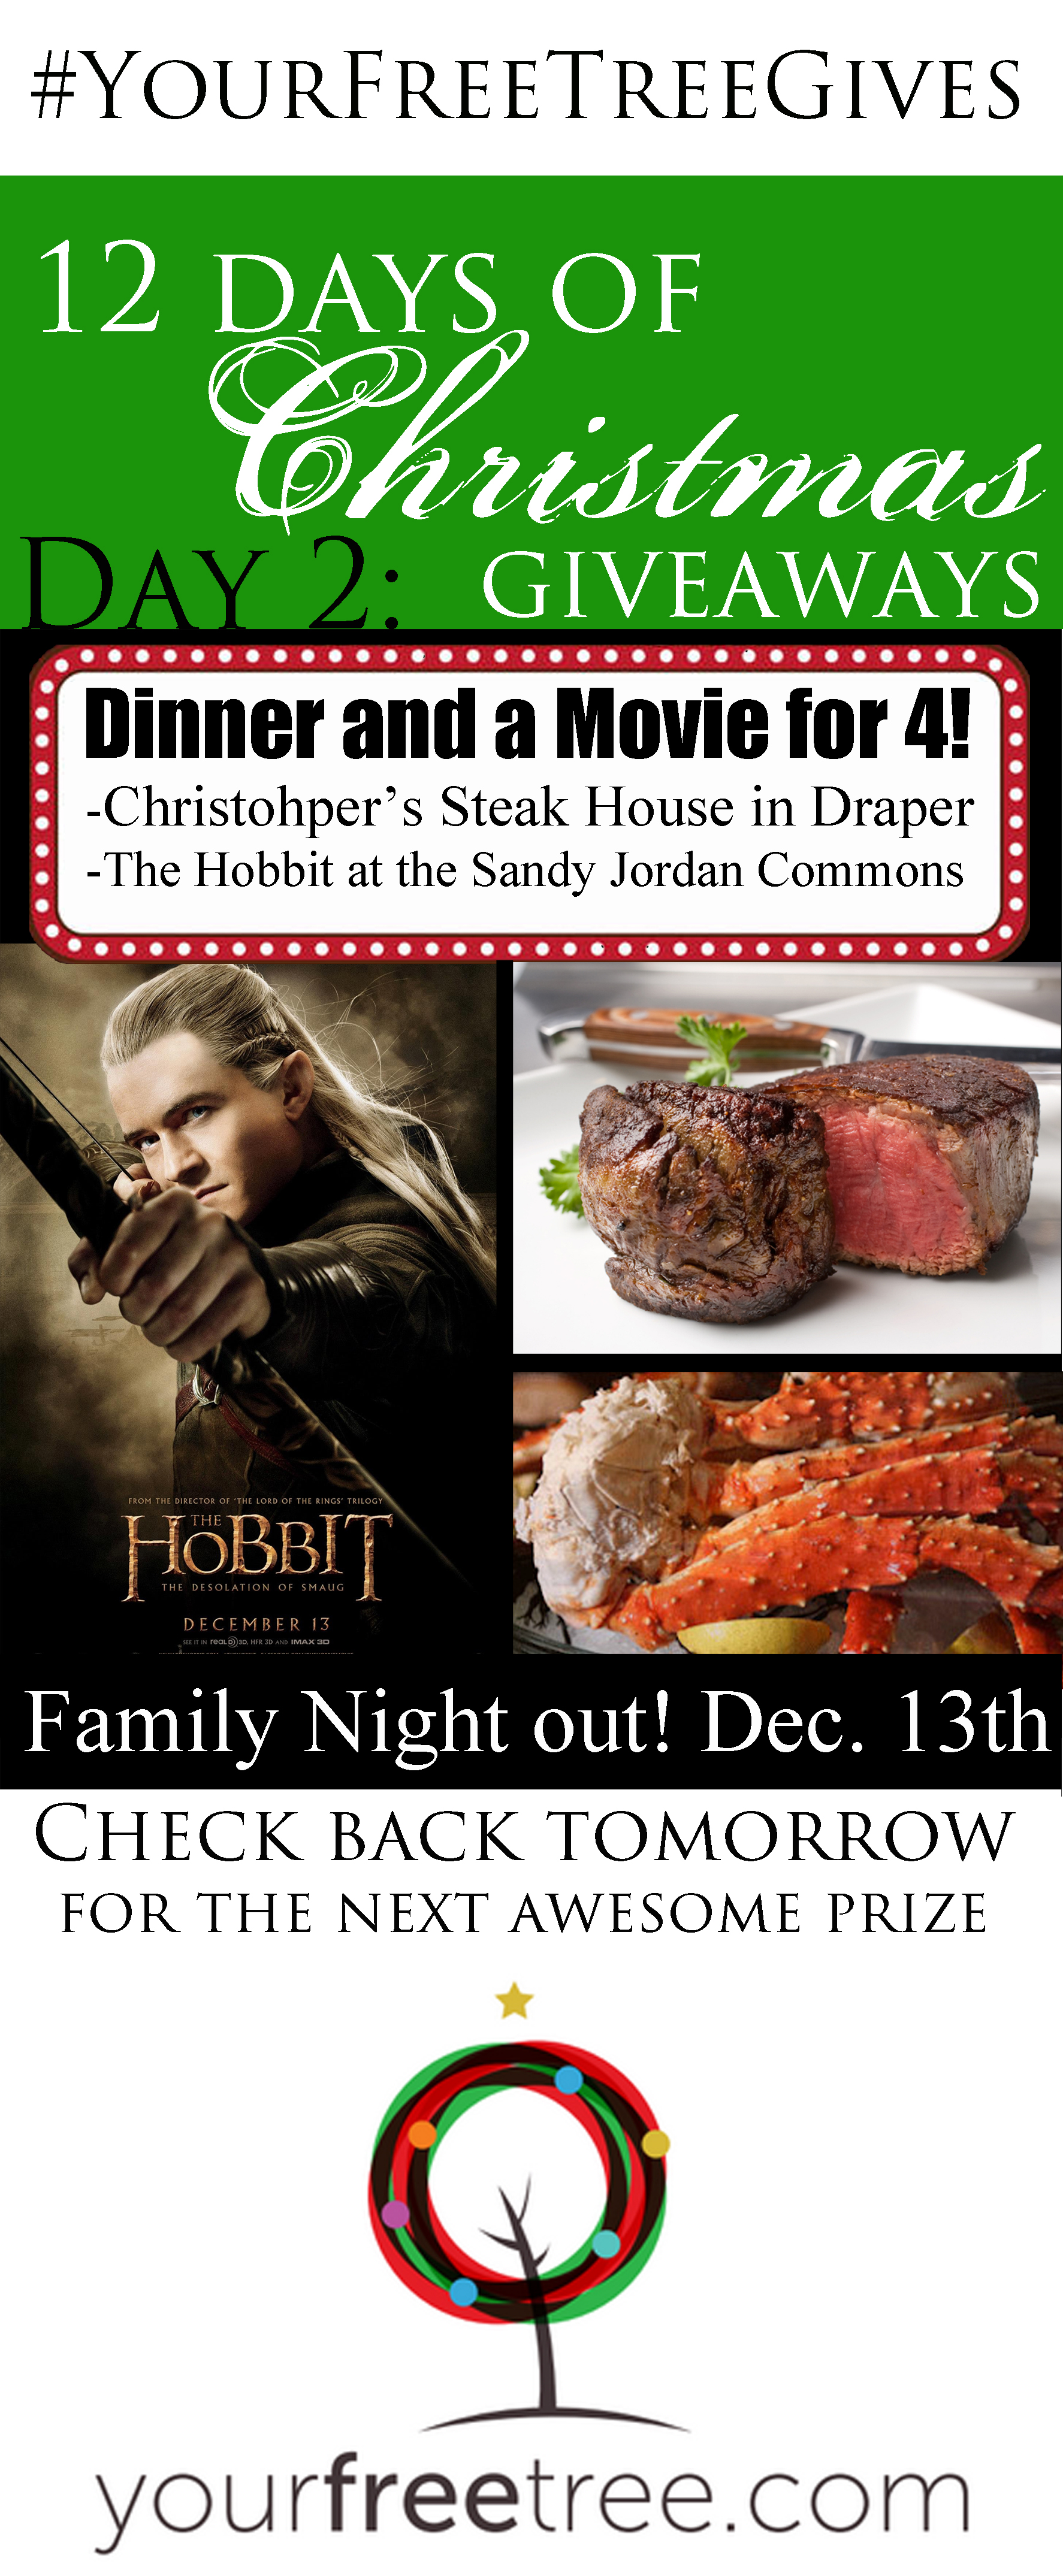 Giveaway for Dinner and tickets to the Hobbit! Enter to win!